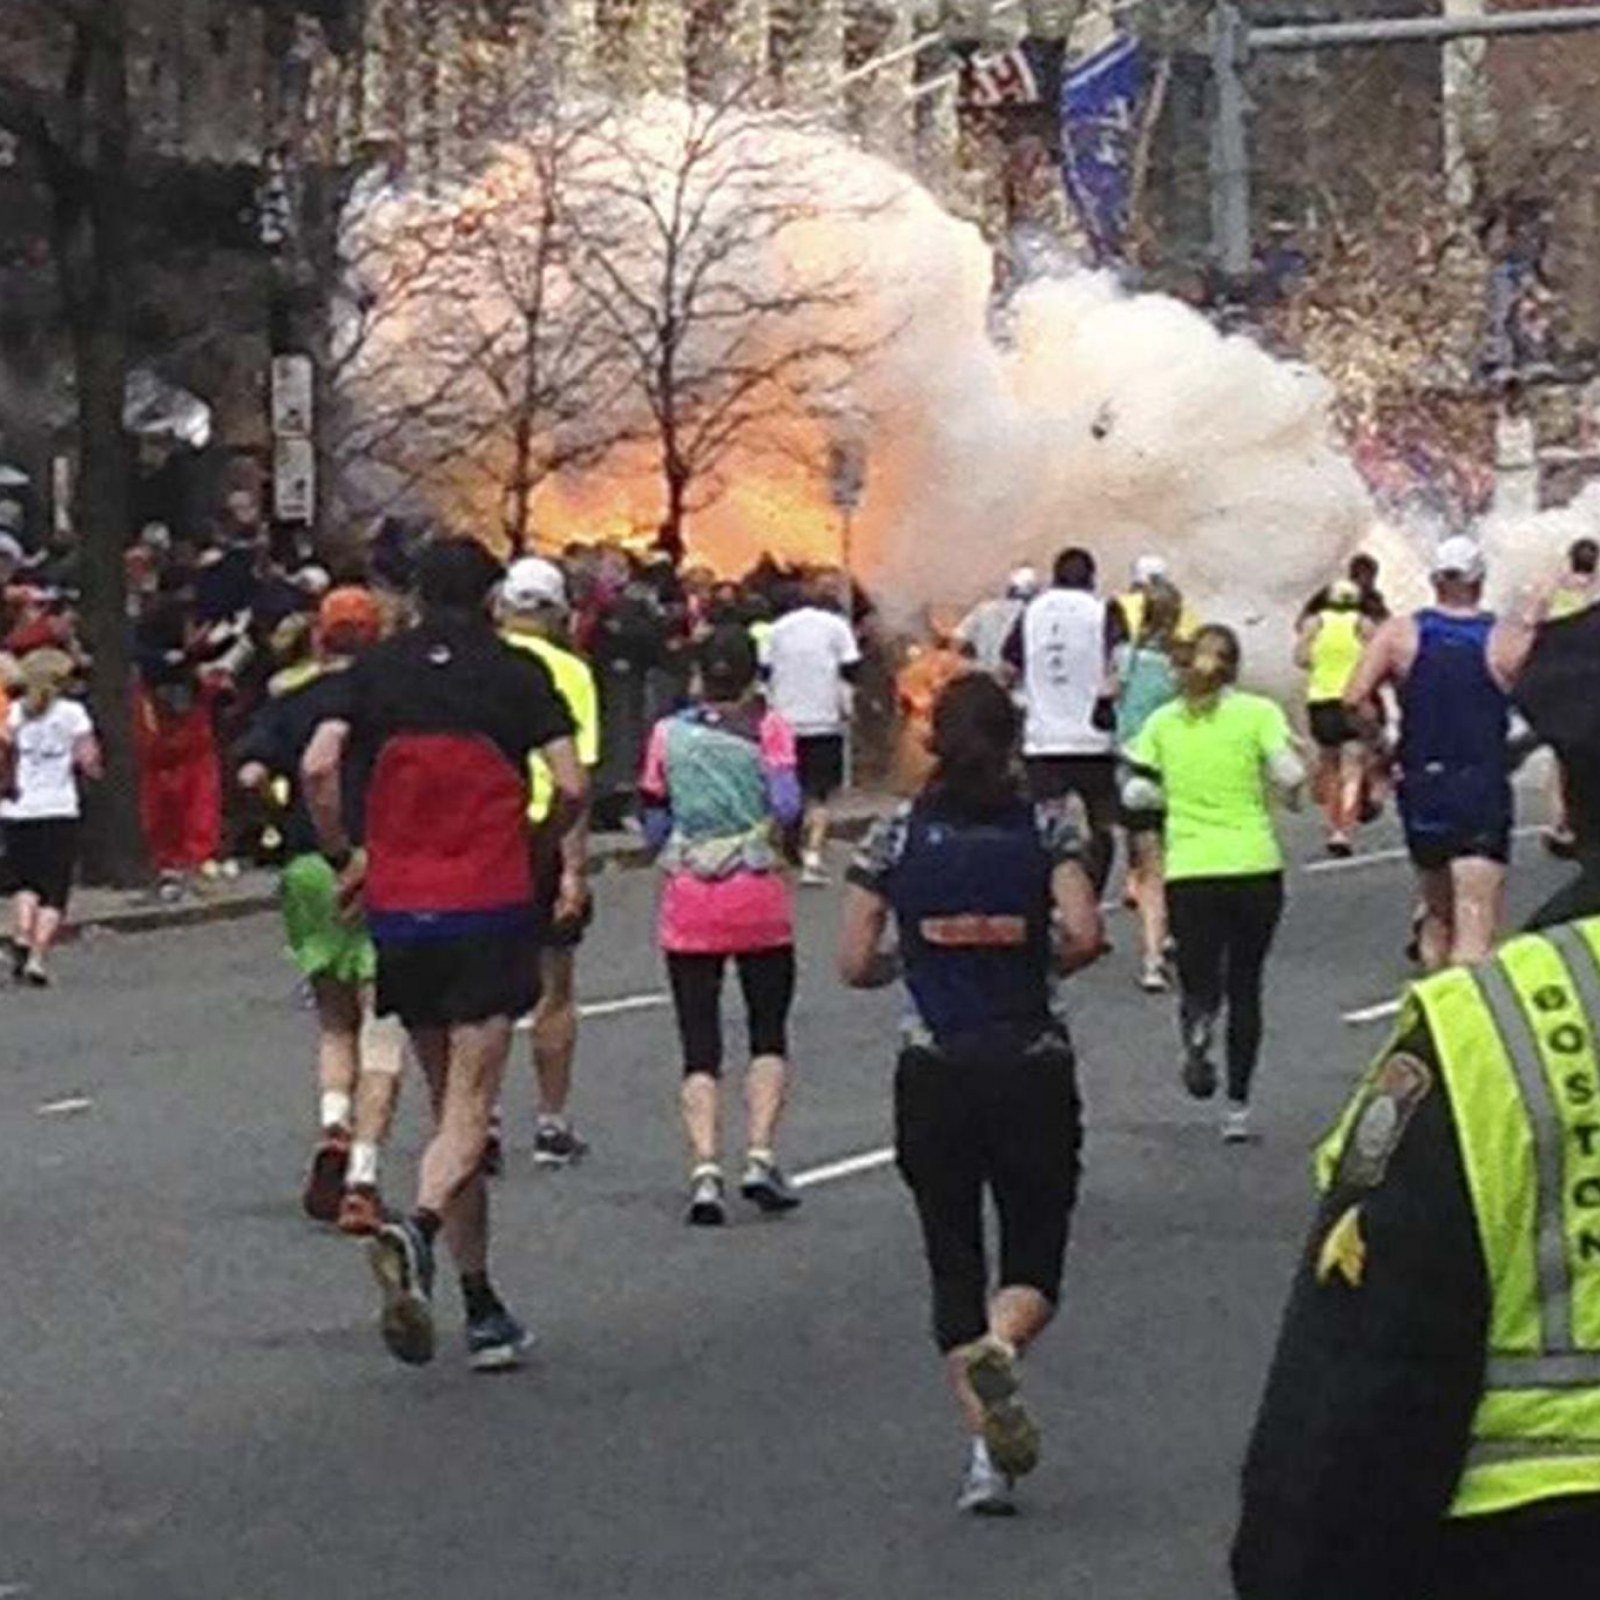 How Social Media Changed News Coverage After the Boston Marathon Attack